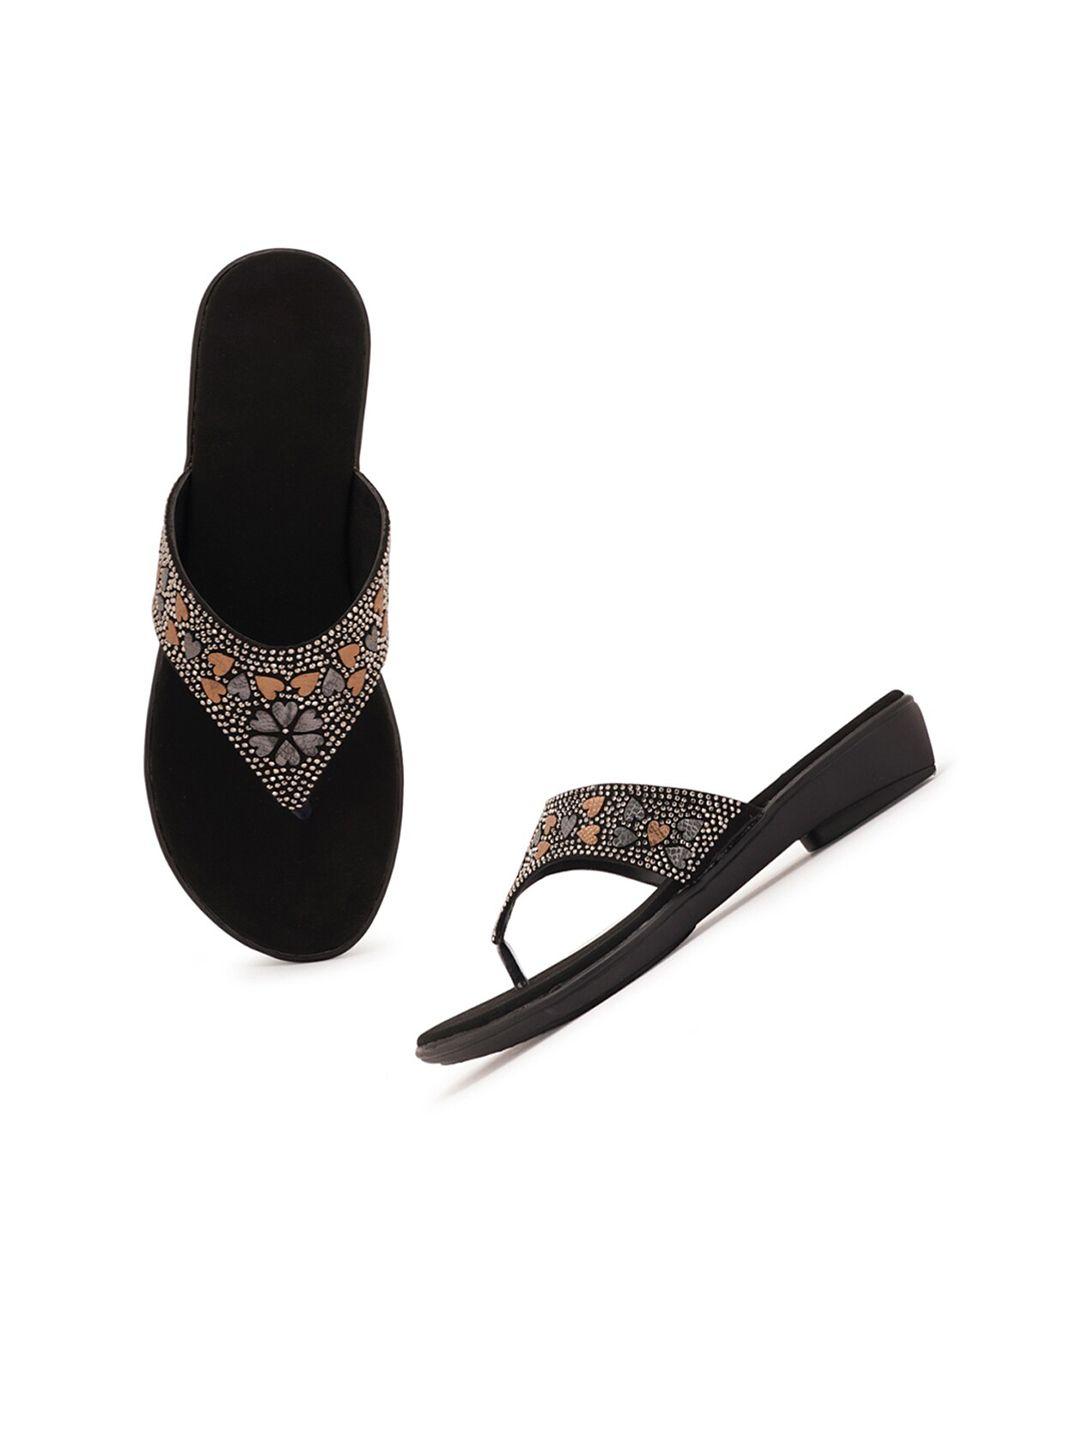 style shoes women black printed t-strap flats